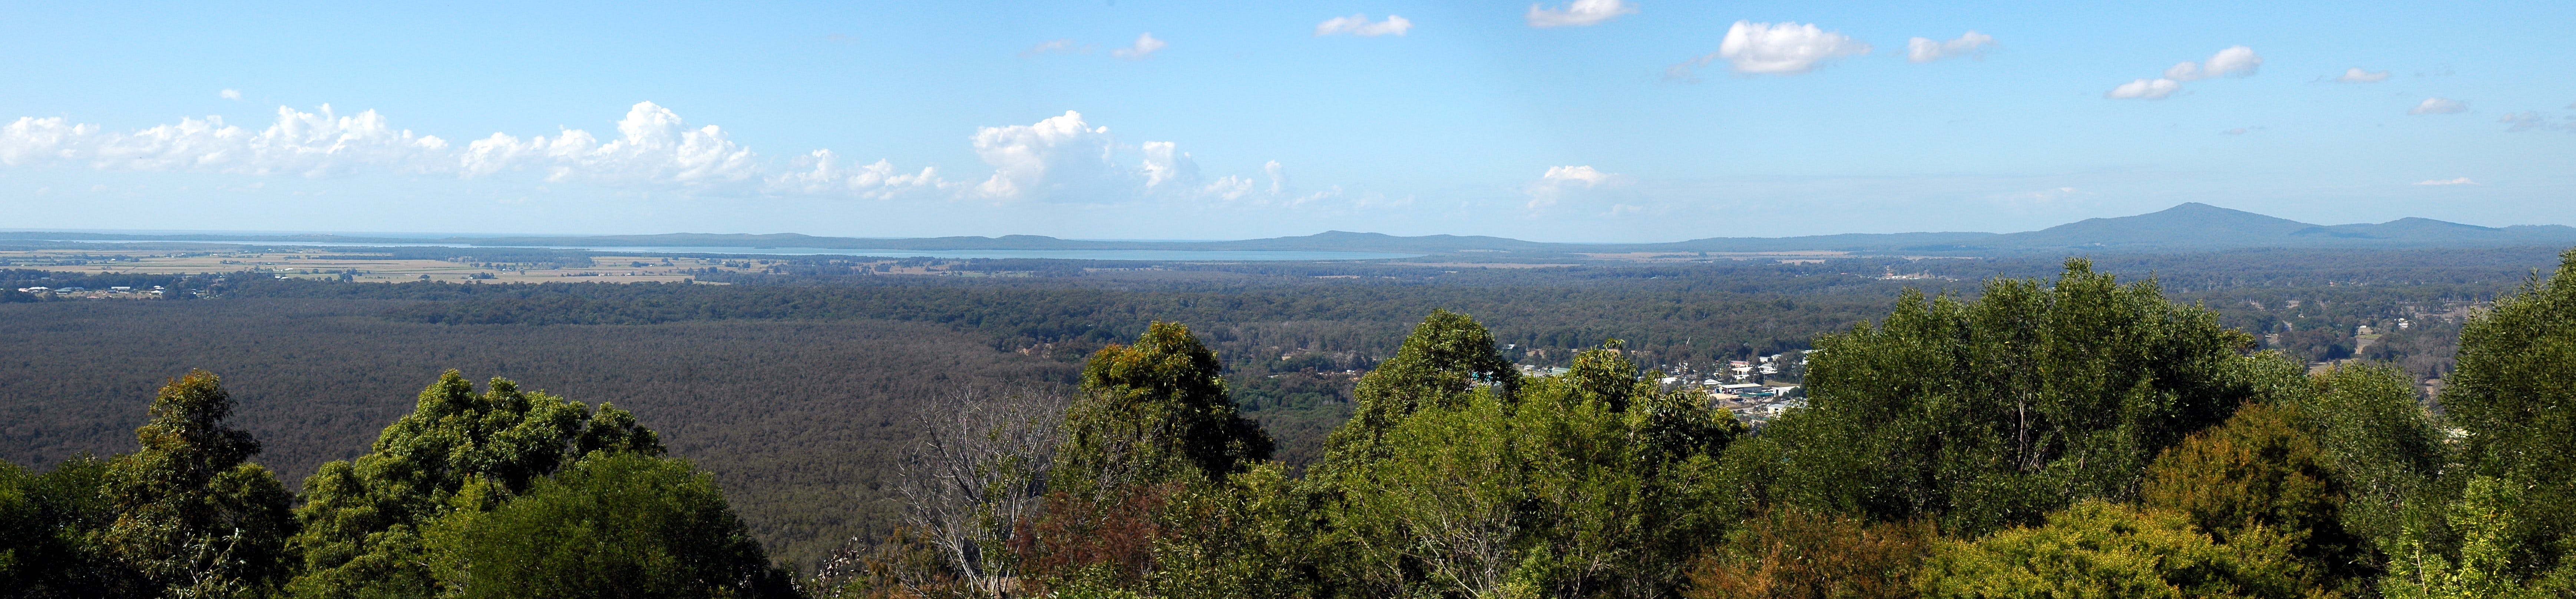 Maclean Lookout - Redcliffe Tourism